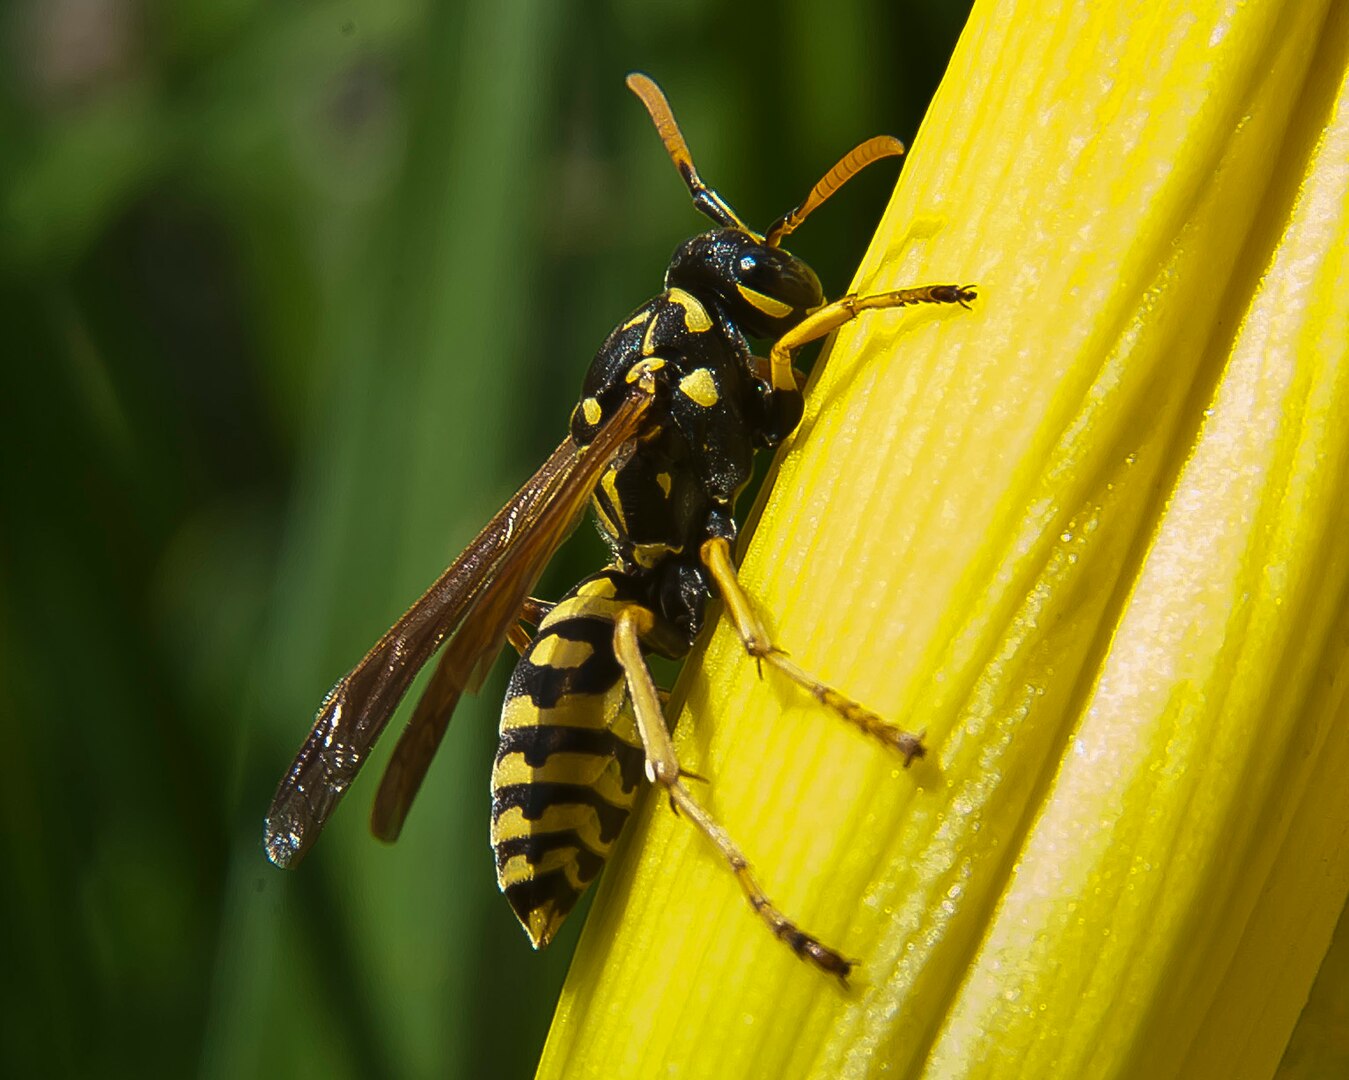 Wasp on green plant